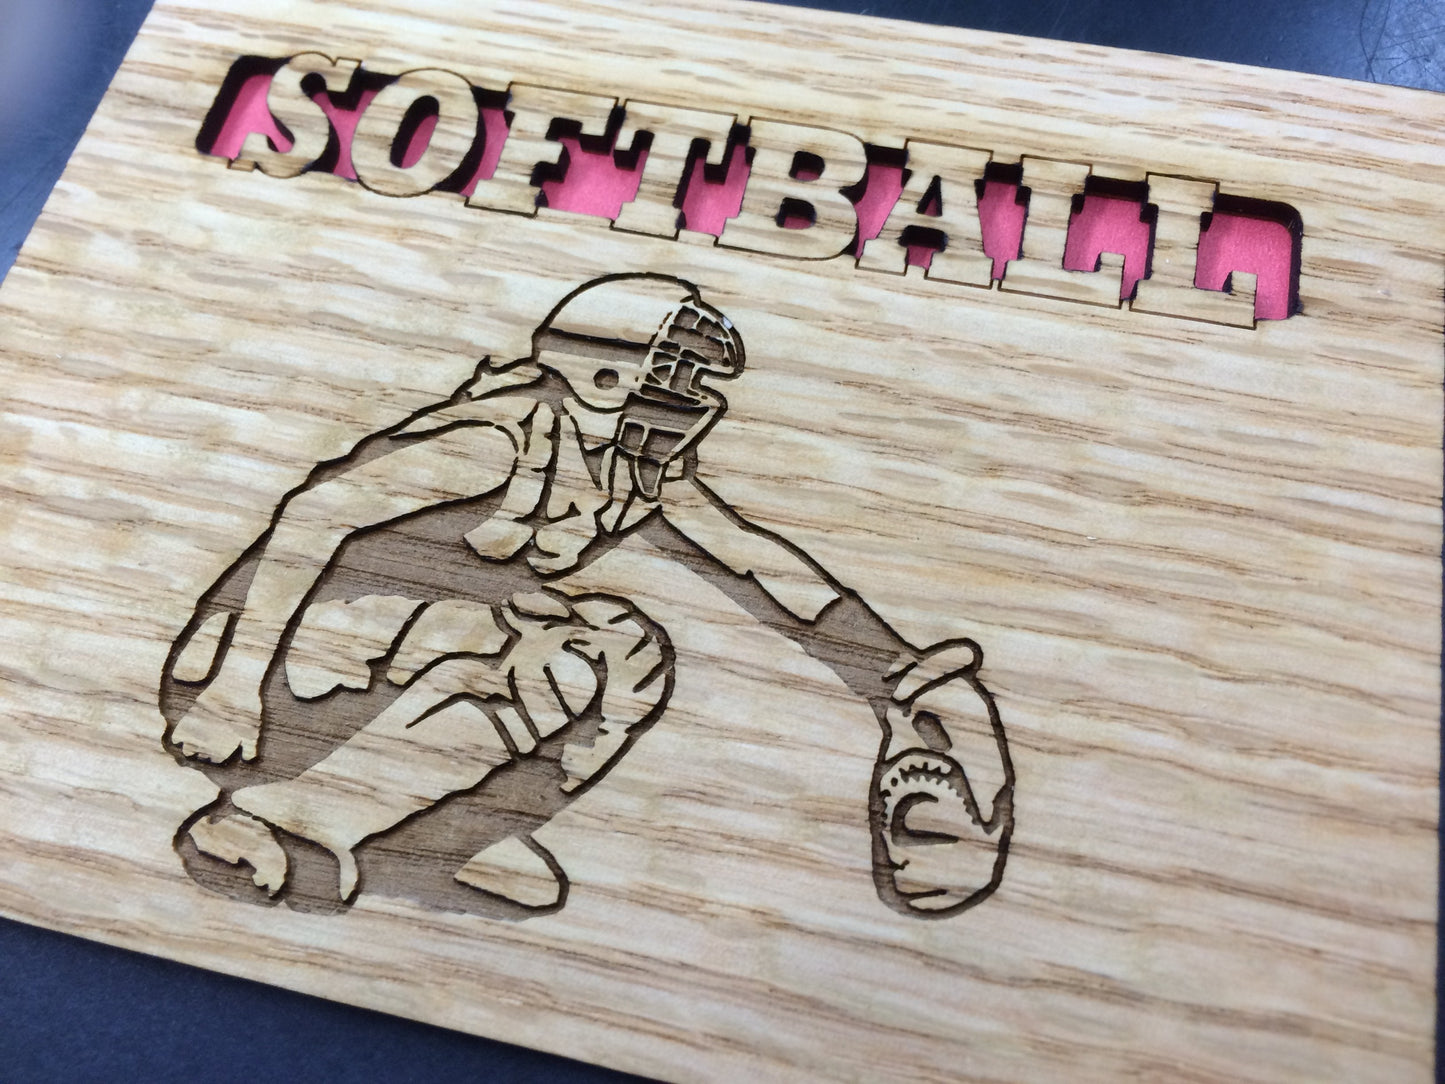 Softball Picture Frame